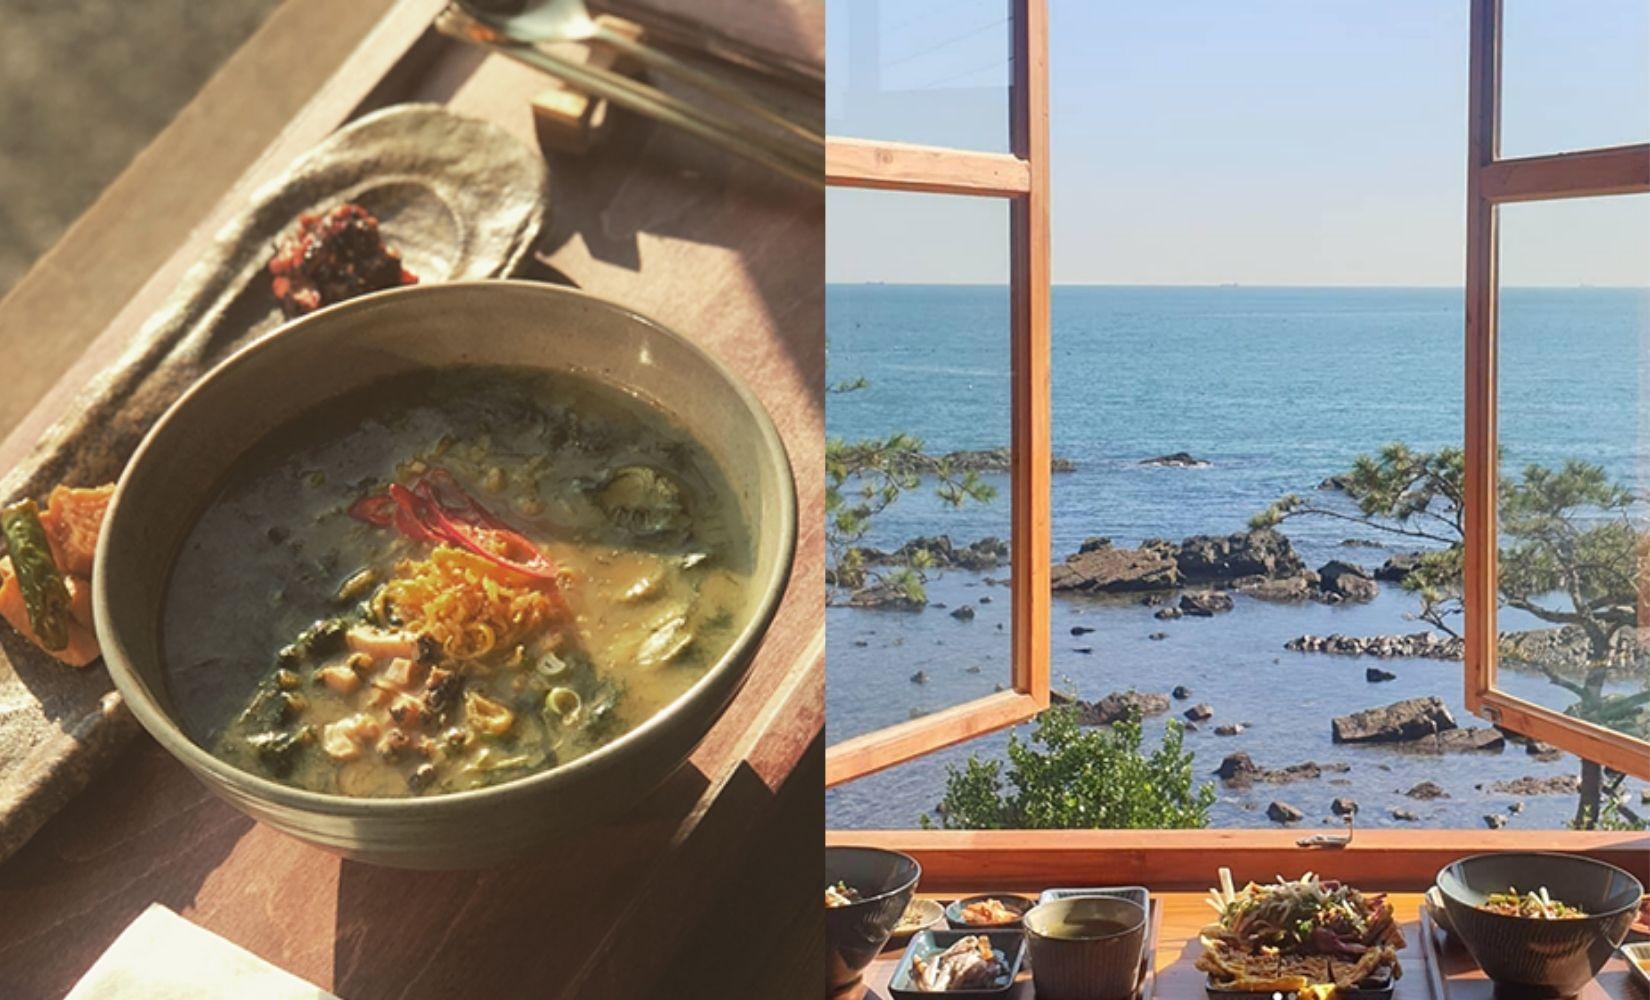 2022 Gijang Restaurant Guide | Where To Eat In Busan